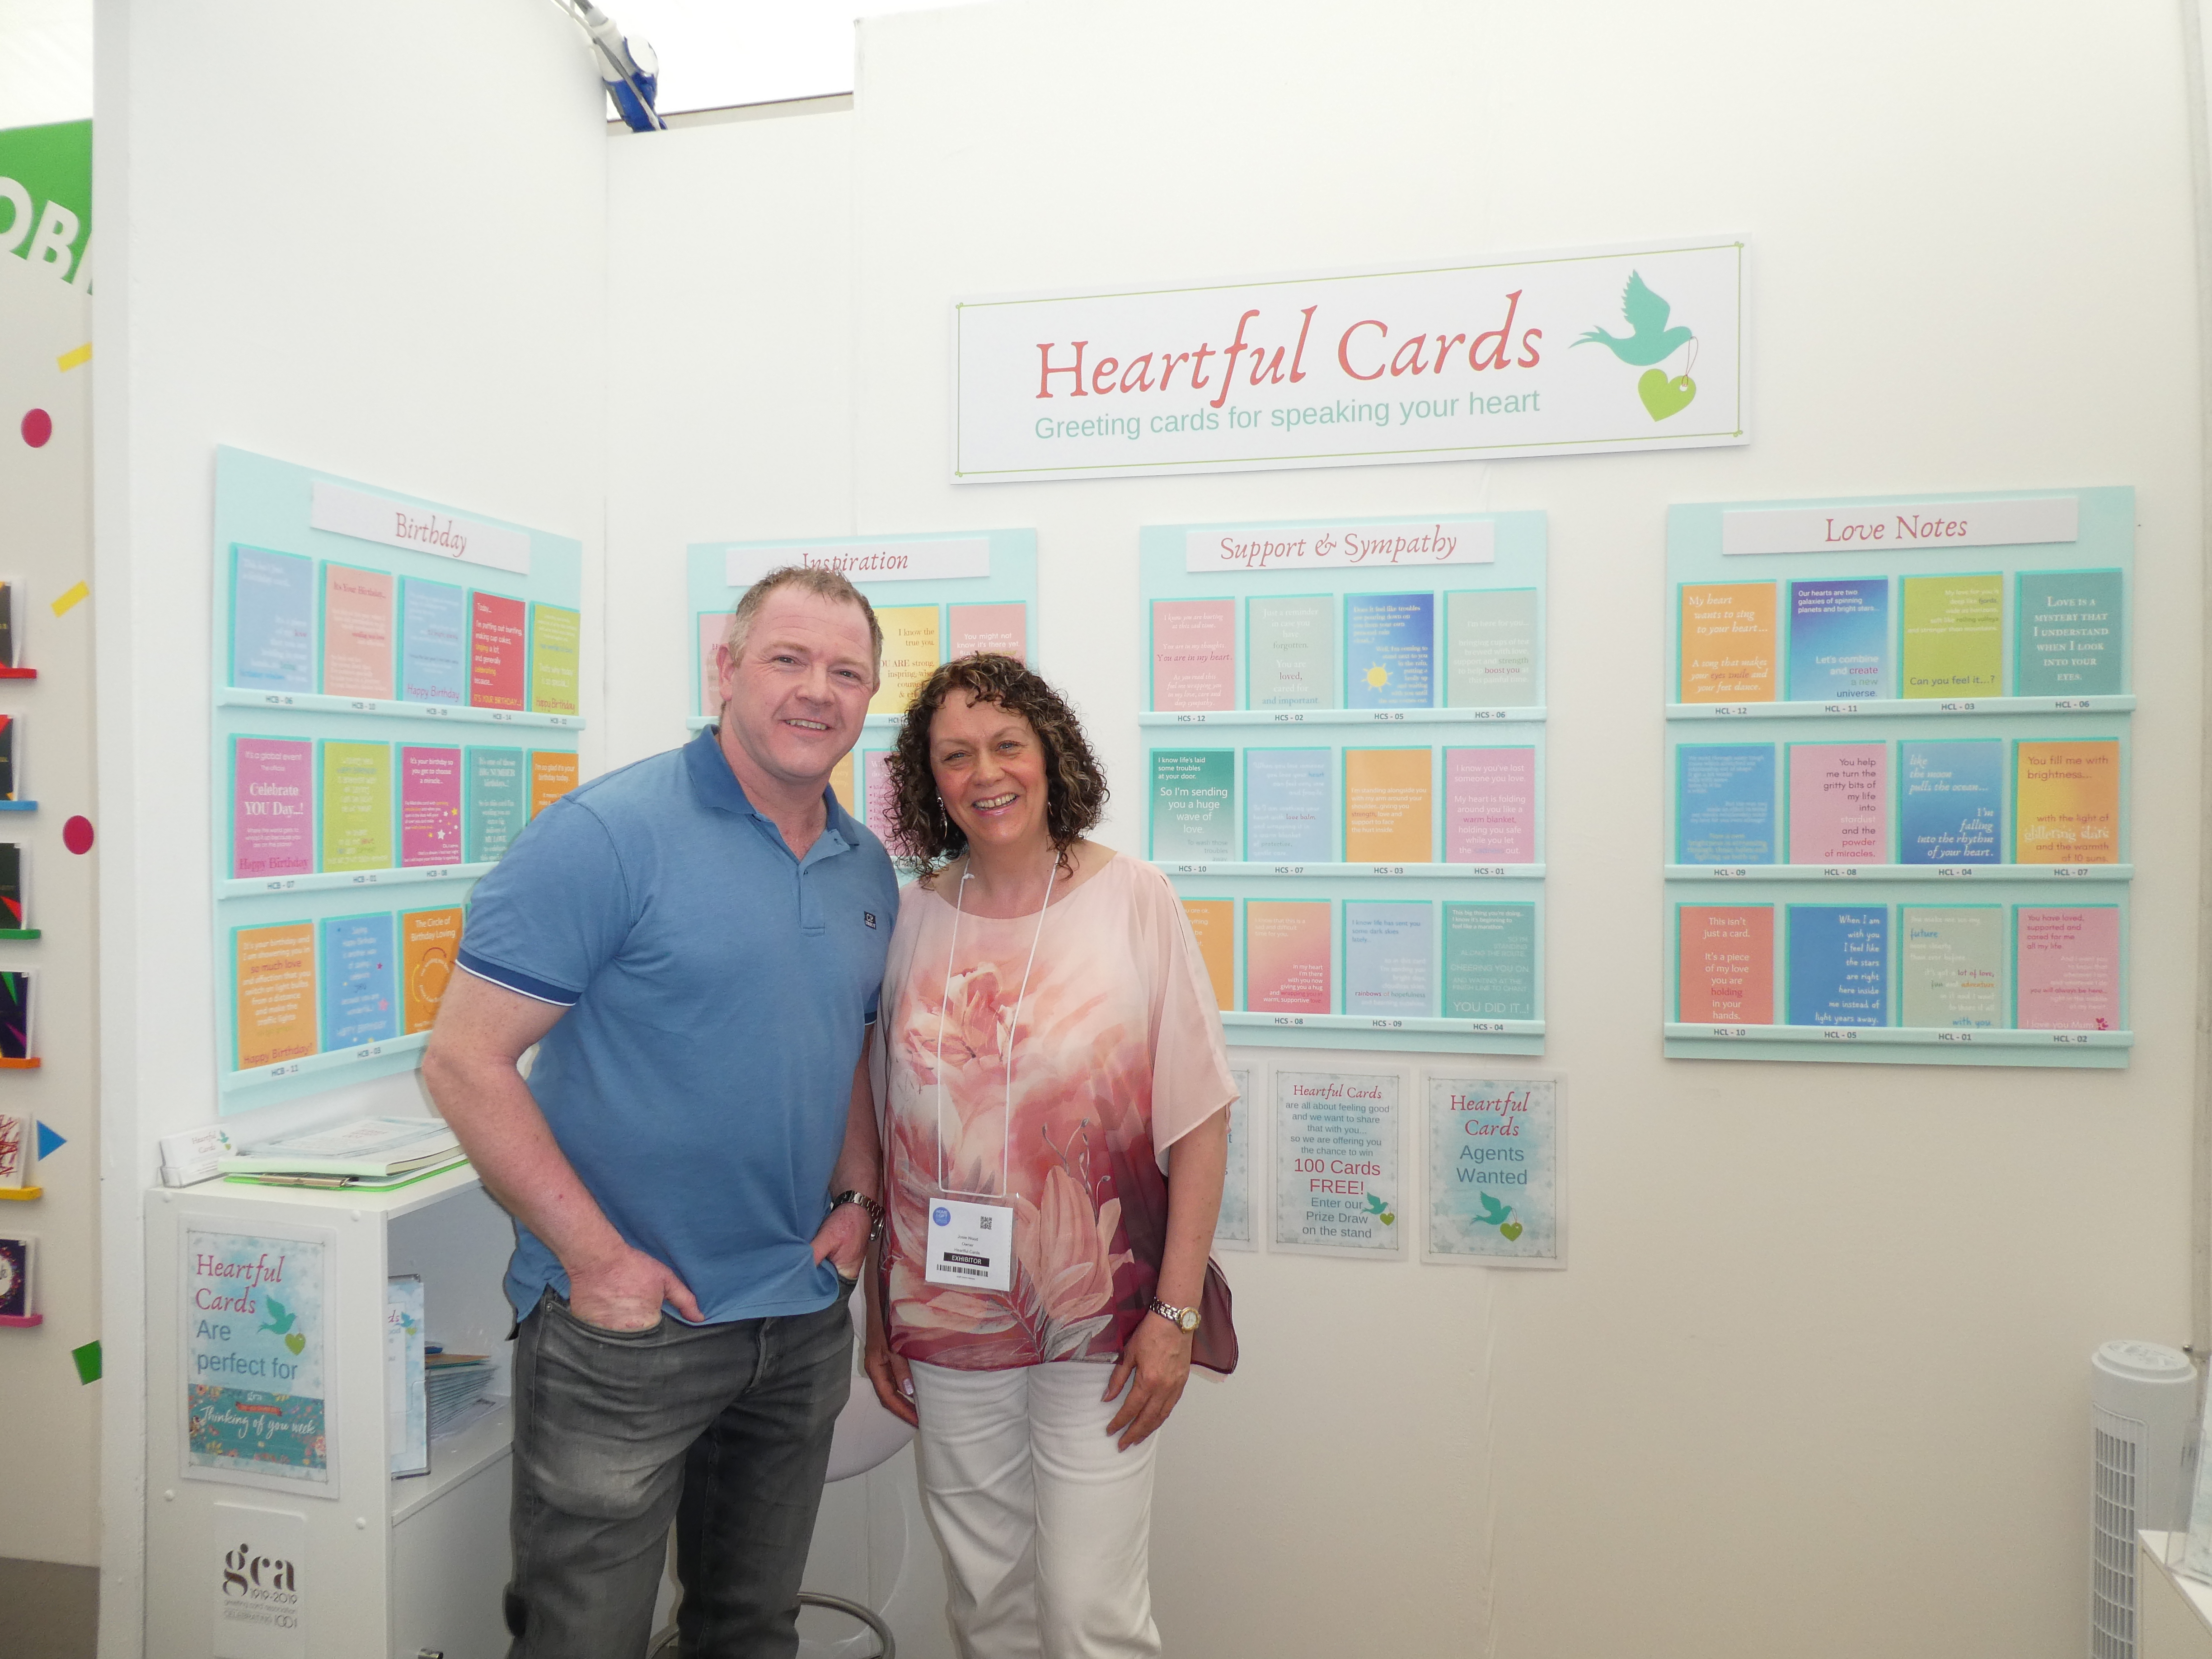 Above: PG columnist David Robertson, md of JP Pozzi met Josie Wood, professional life coach who made her greeting card debut with Heartfelt Cards.